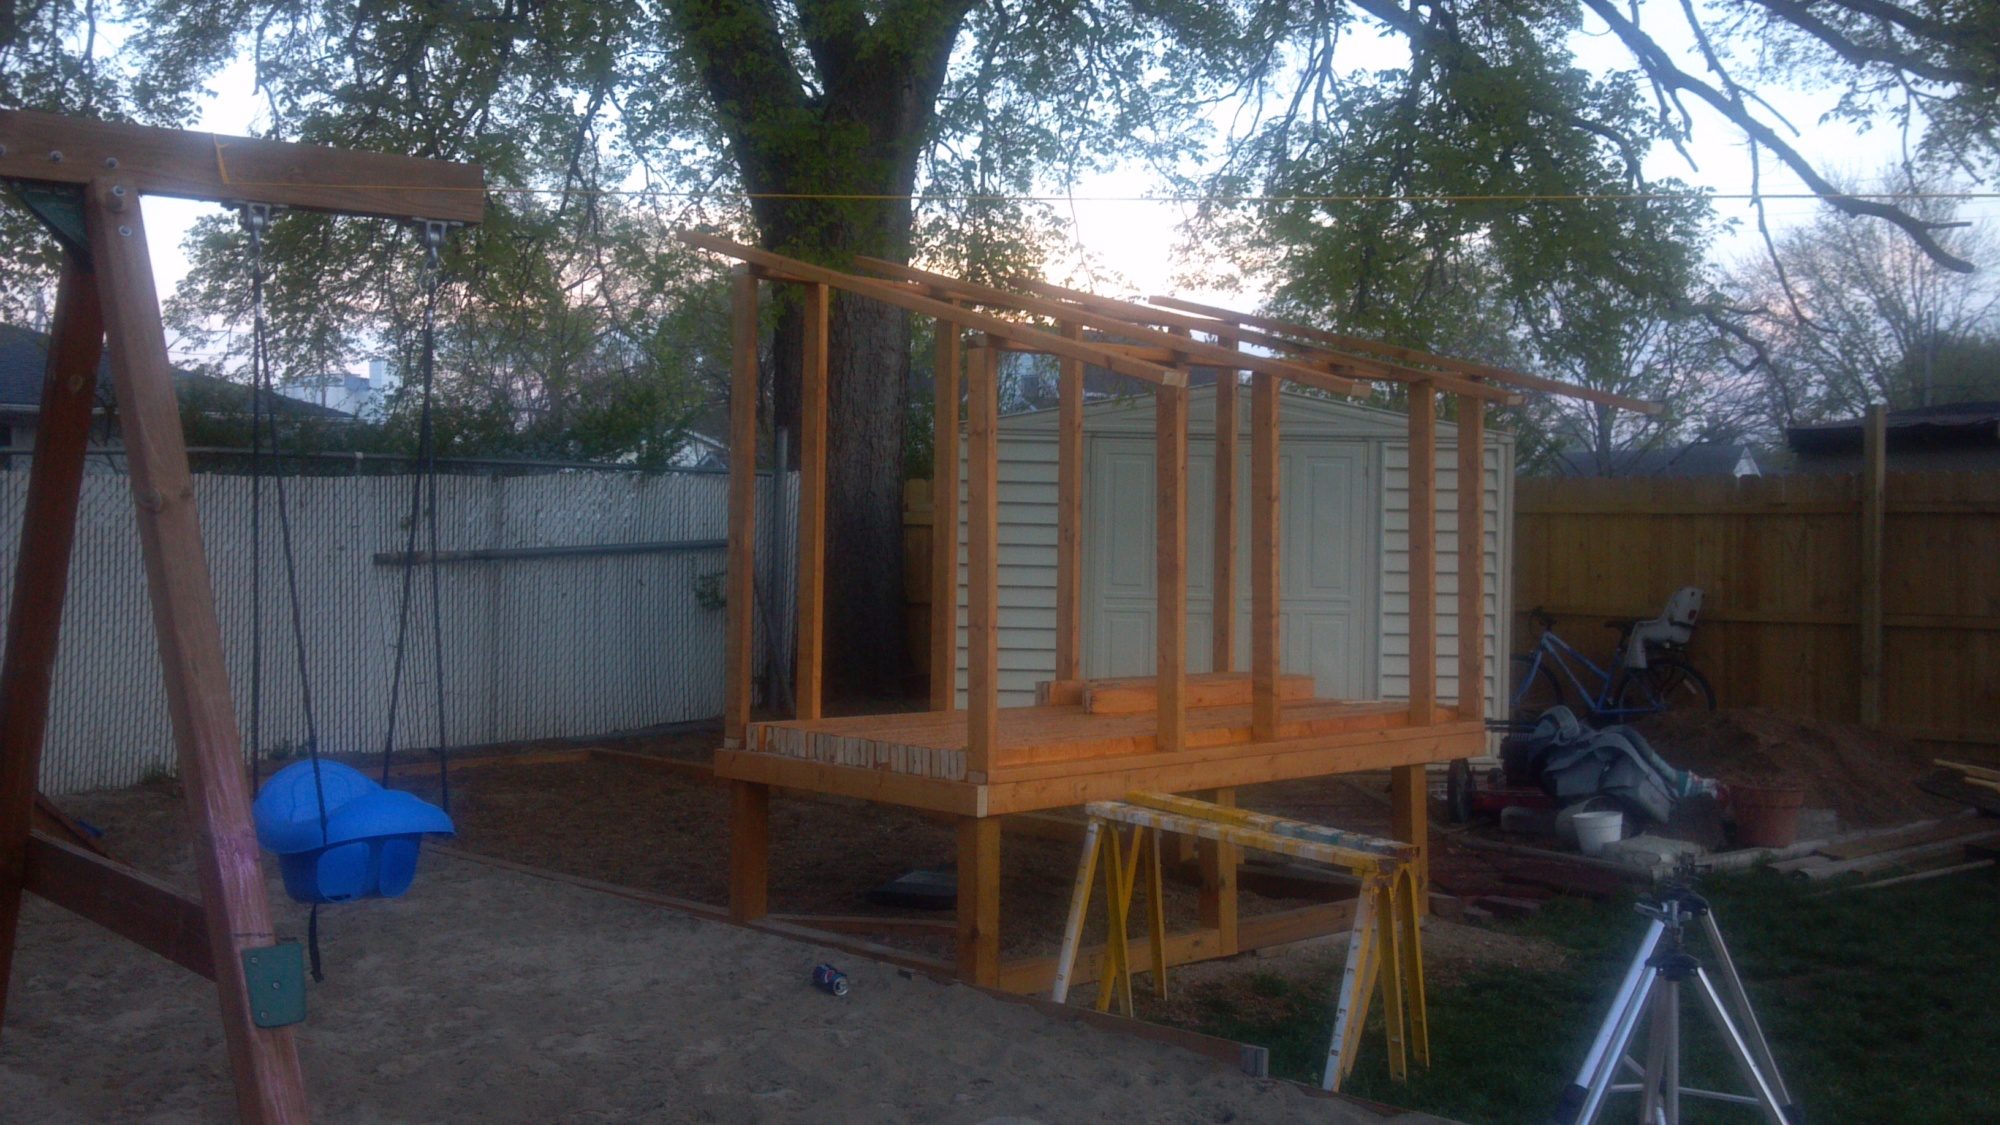 Front and back frames up and roof slats.... 4x8 coop w 16ft run attached under a large tree.